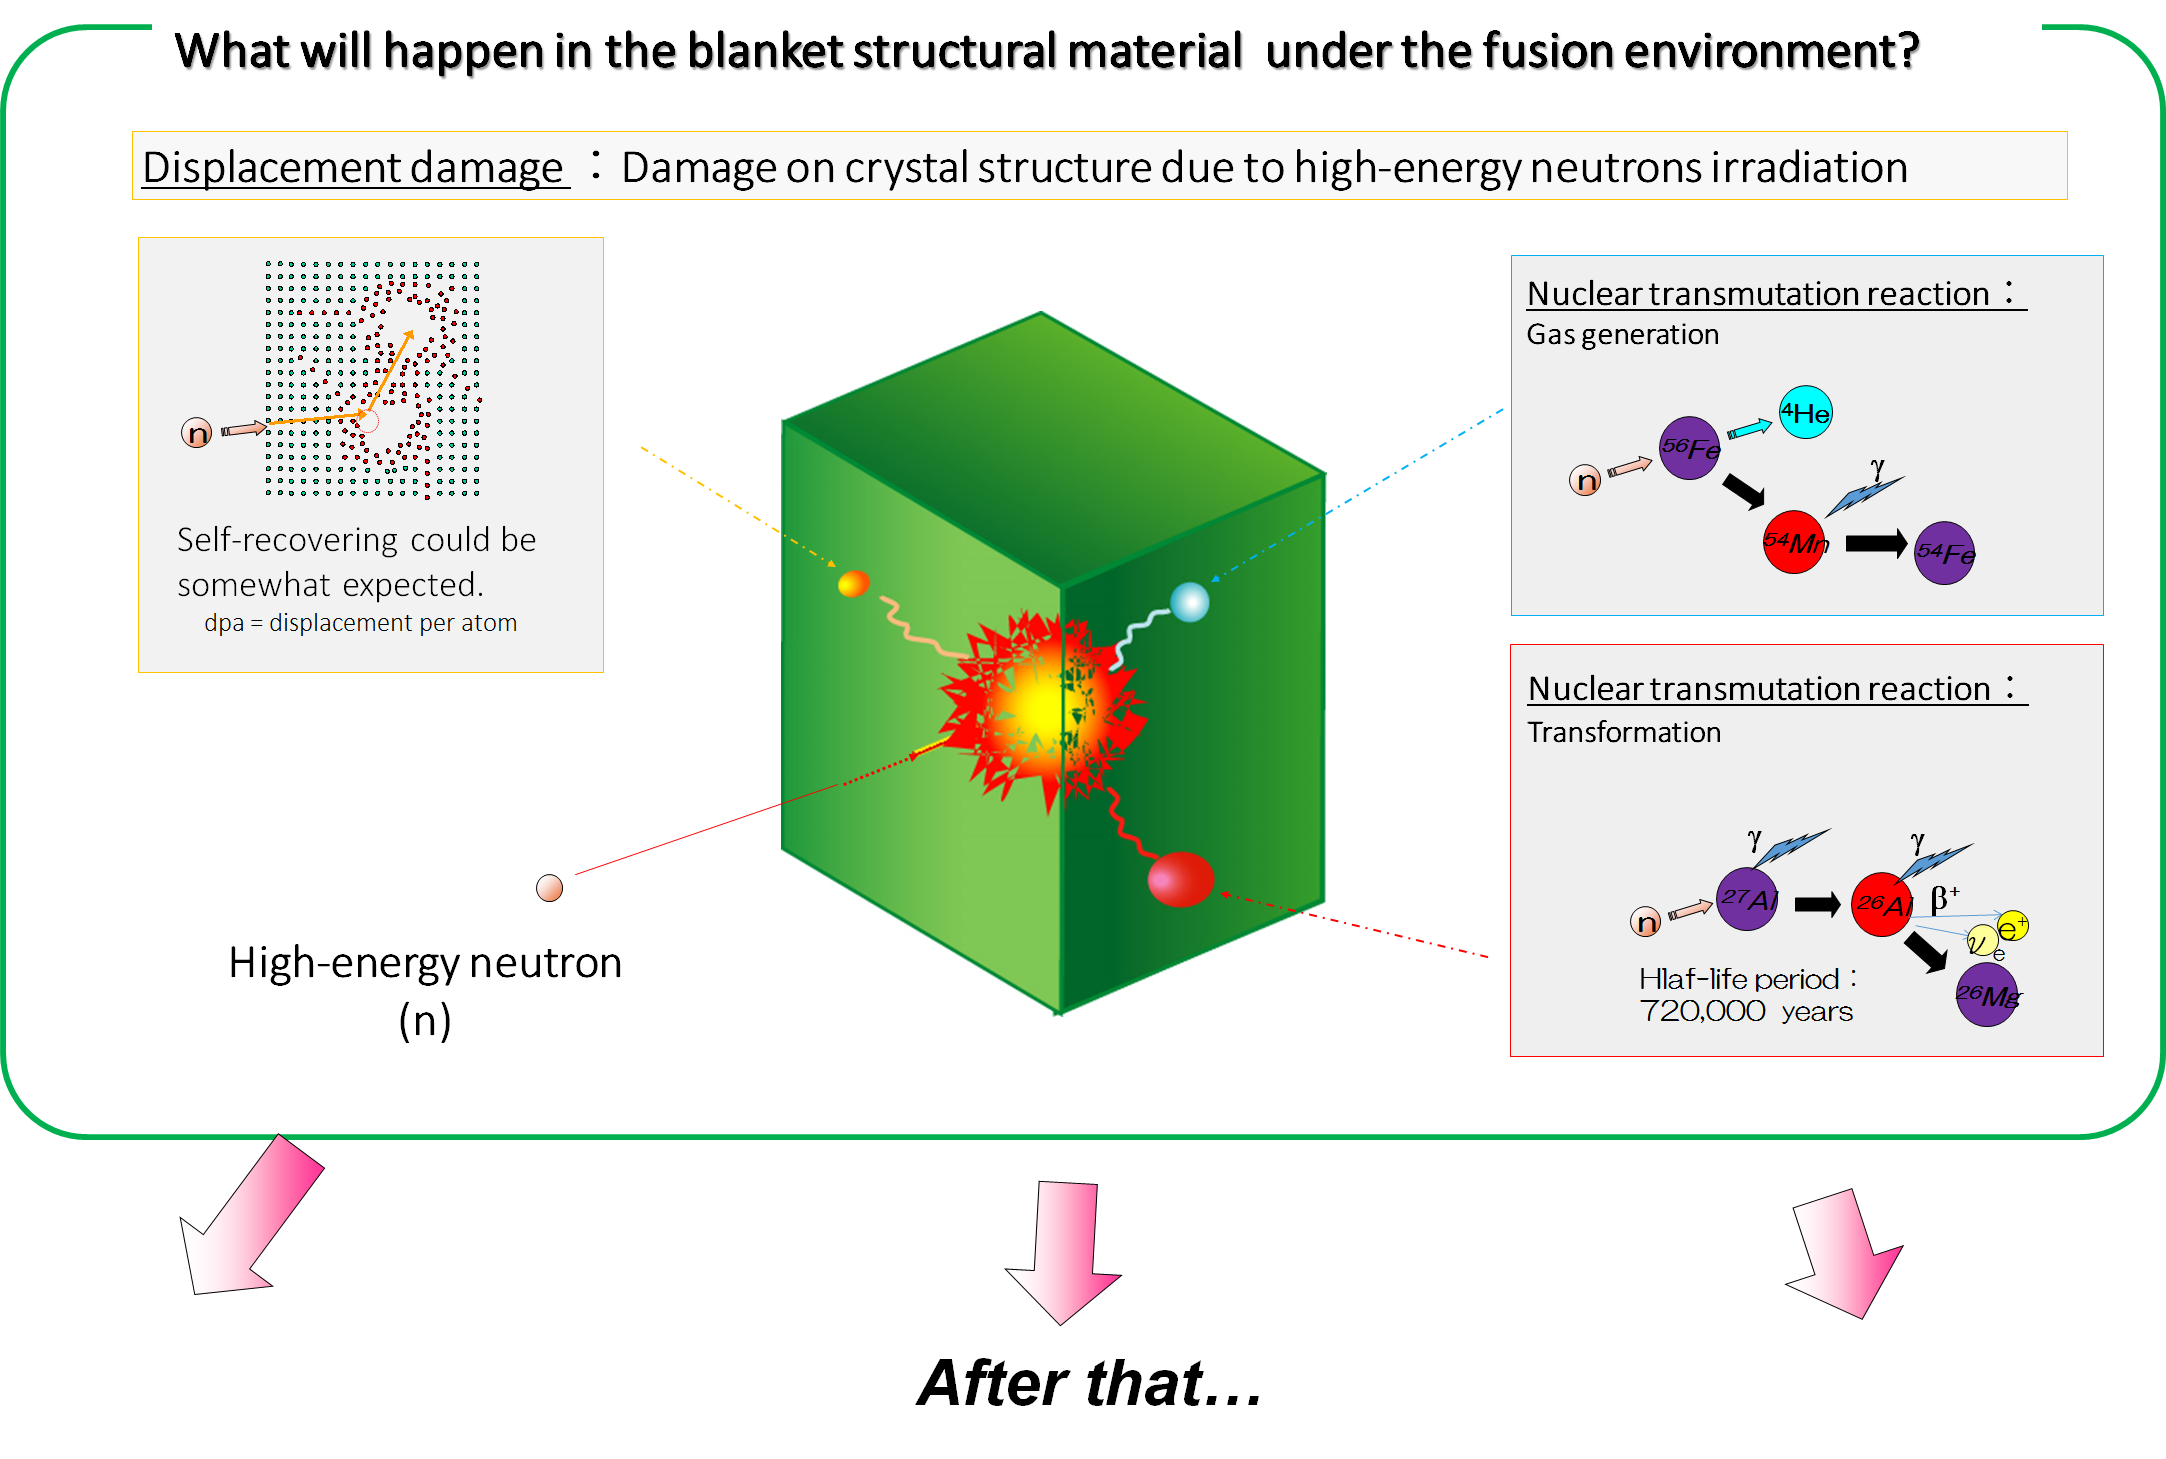 Fusion Reactor Material Researchの画像